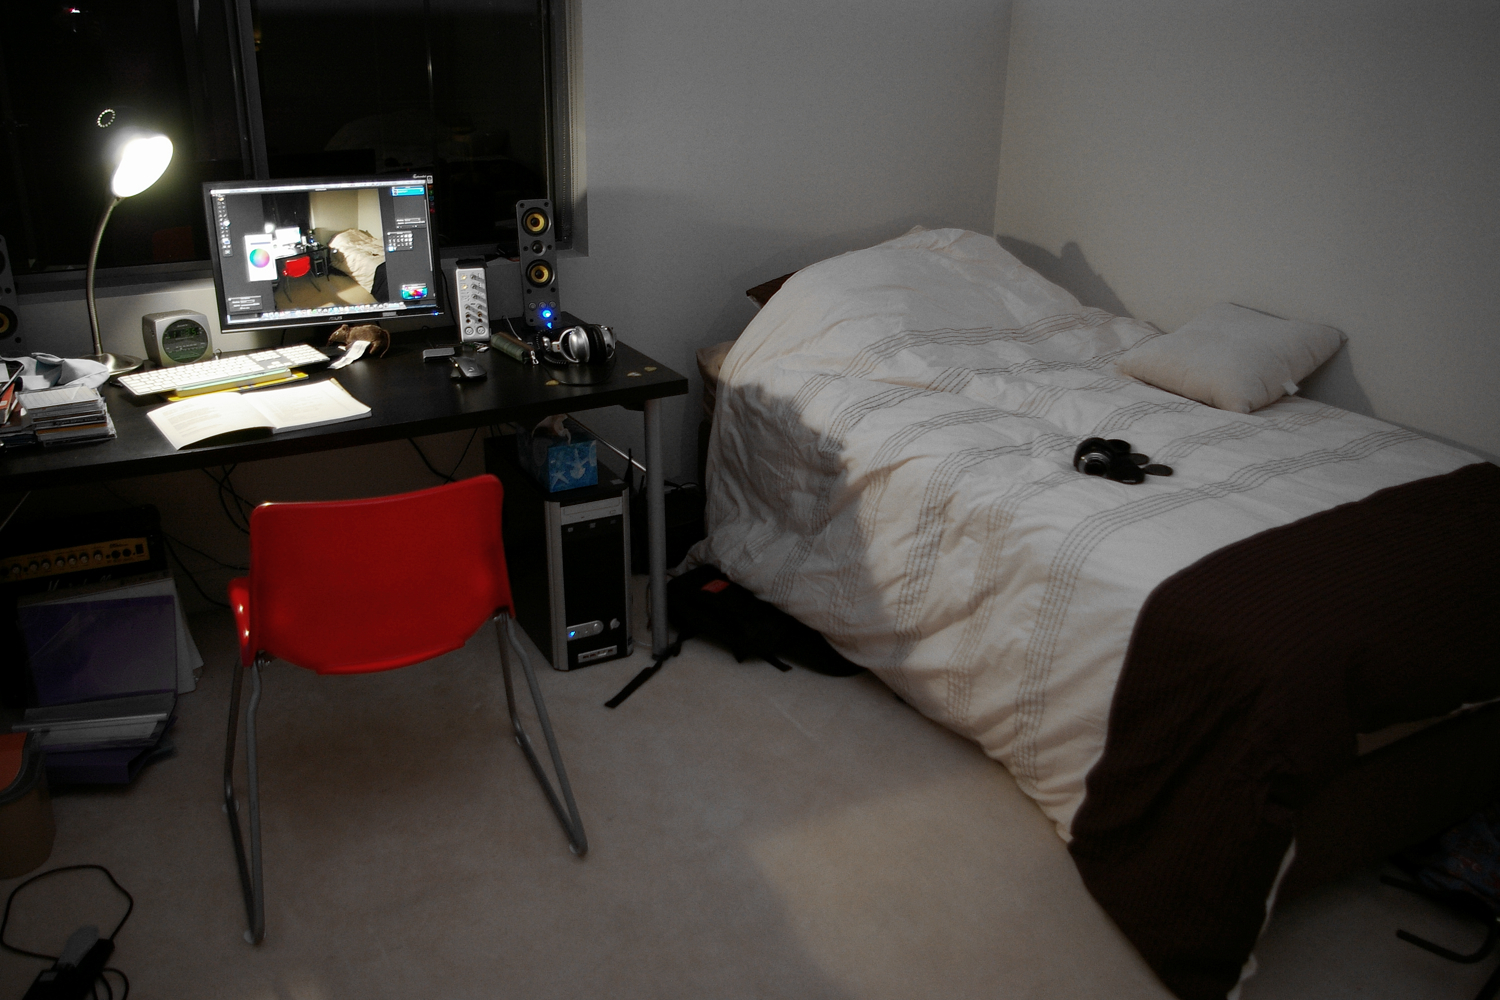 bedroom with desk with a laptop and keyboard on the desk